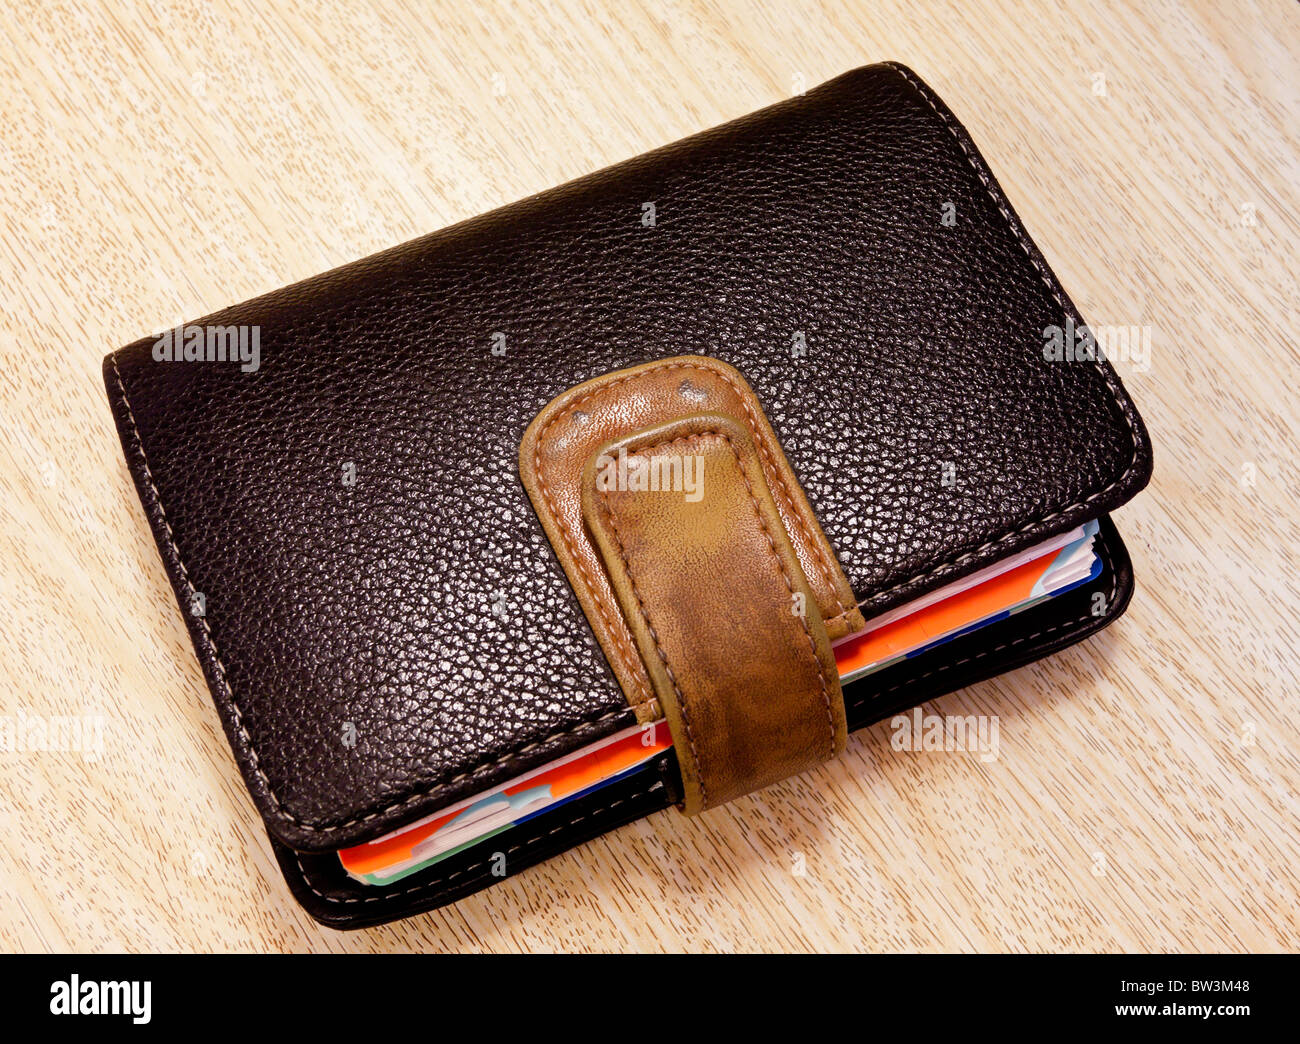 Leather bound personal organiser based upon the Filofax design popular in the 1980s Stock Photo